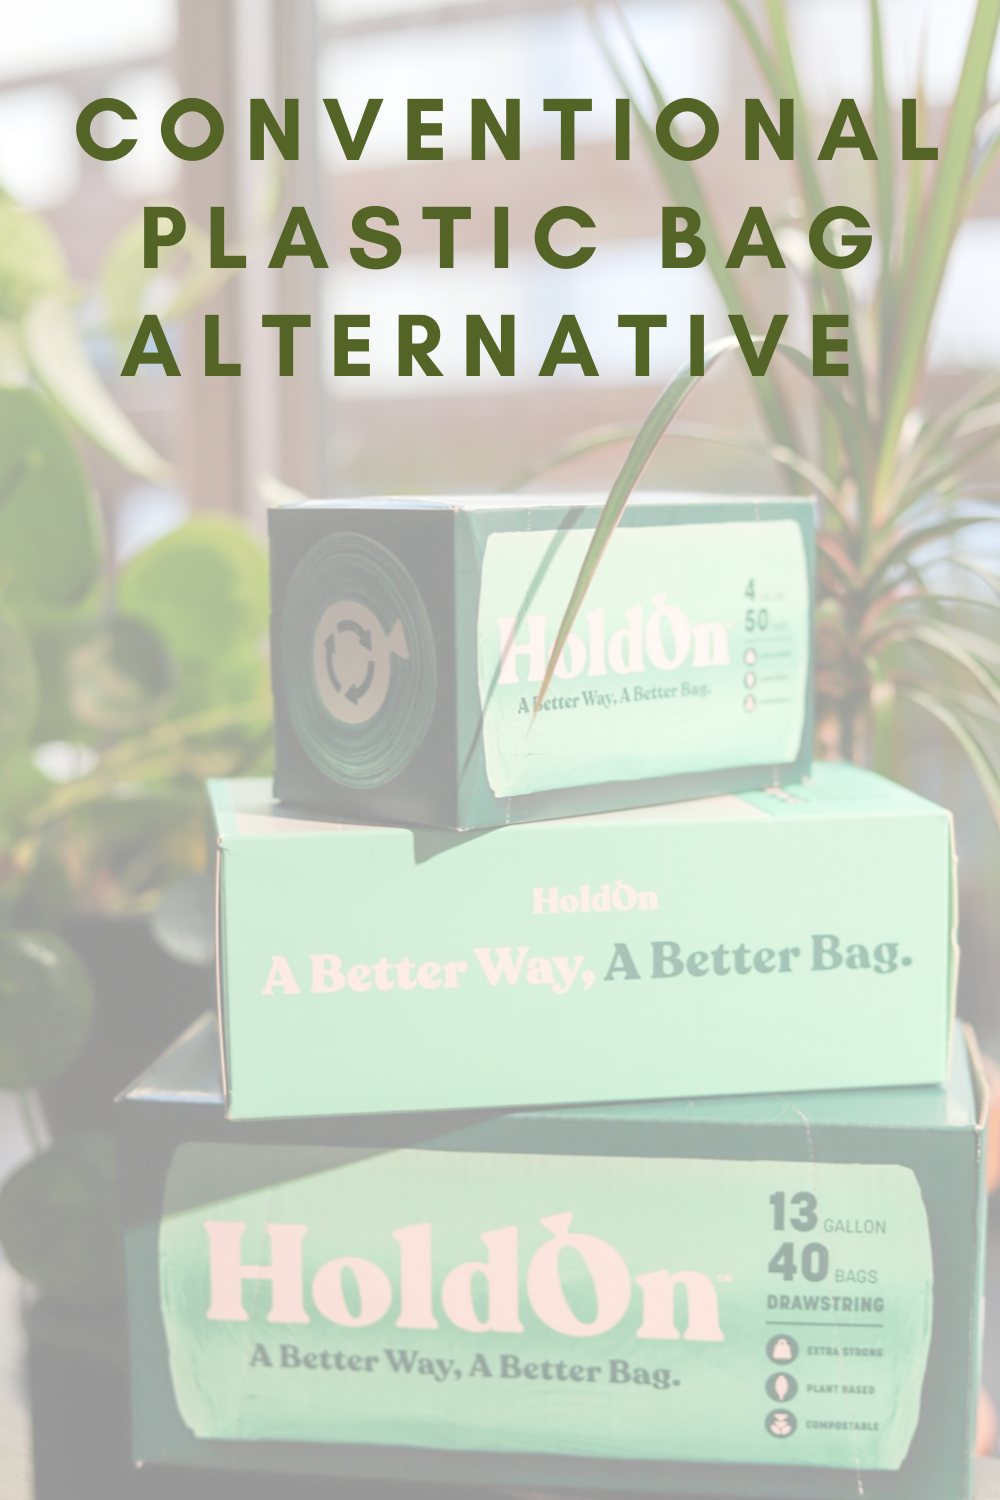 hold on trash and zip bags, heavy duty trash bags, easy home compostable bags that are better than plastic, discount code, compostable bags on the go for trips, snacks, and more, lments of style, la blogger, plant-based bags